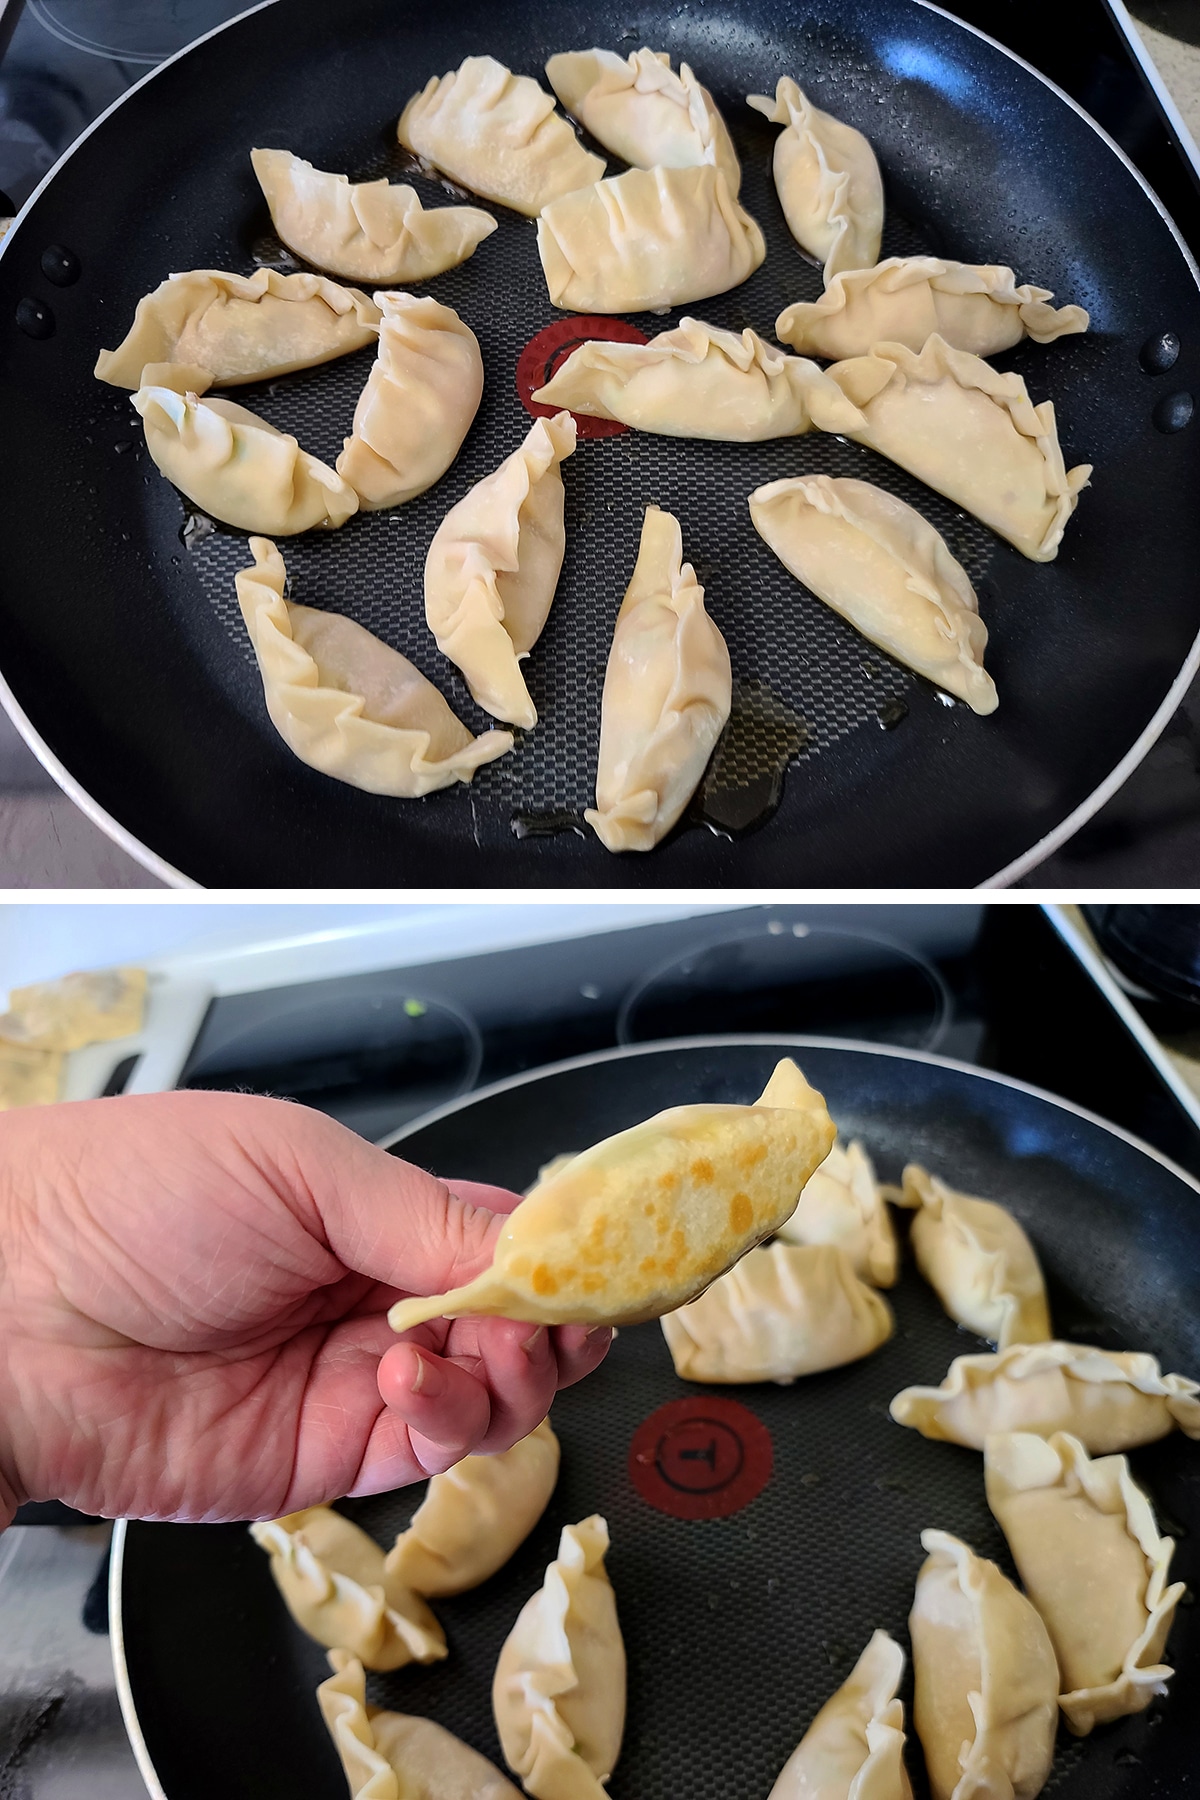 A two part image showing dumplings arranged in a large nonstick pan, and a hand showing the browned bottom of one dumpling.